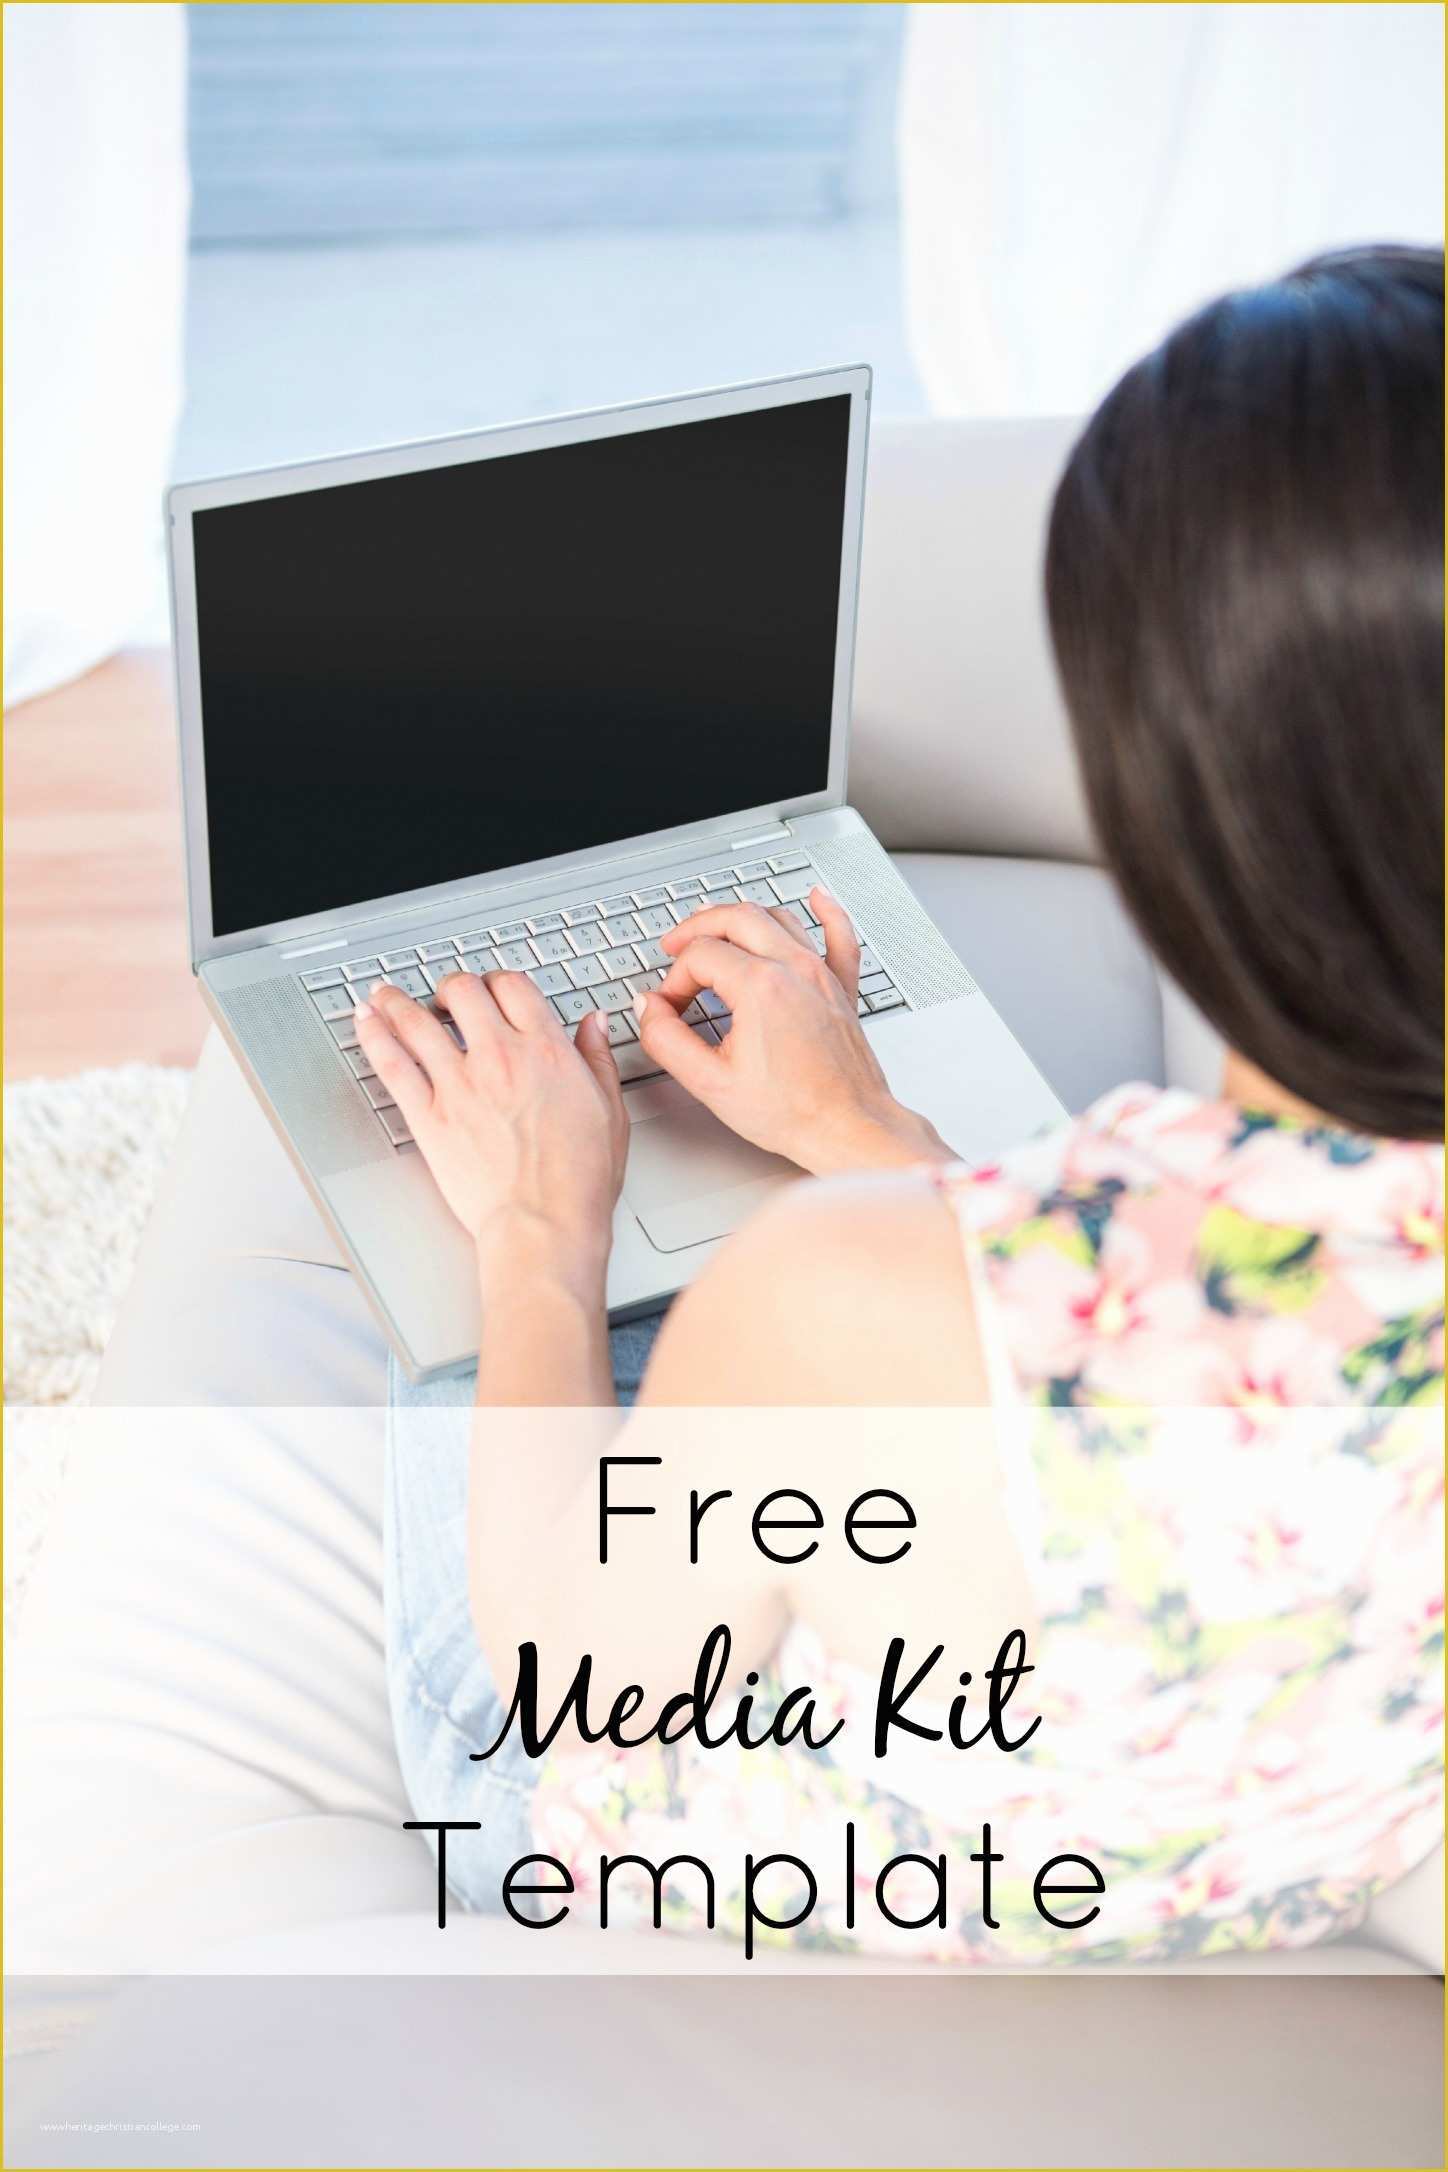 Free Press Kit Template Of attracting Sponsors A Free Media Kit Template